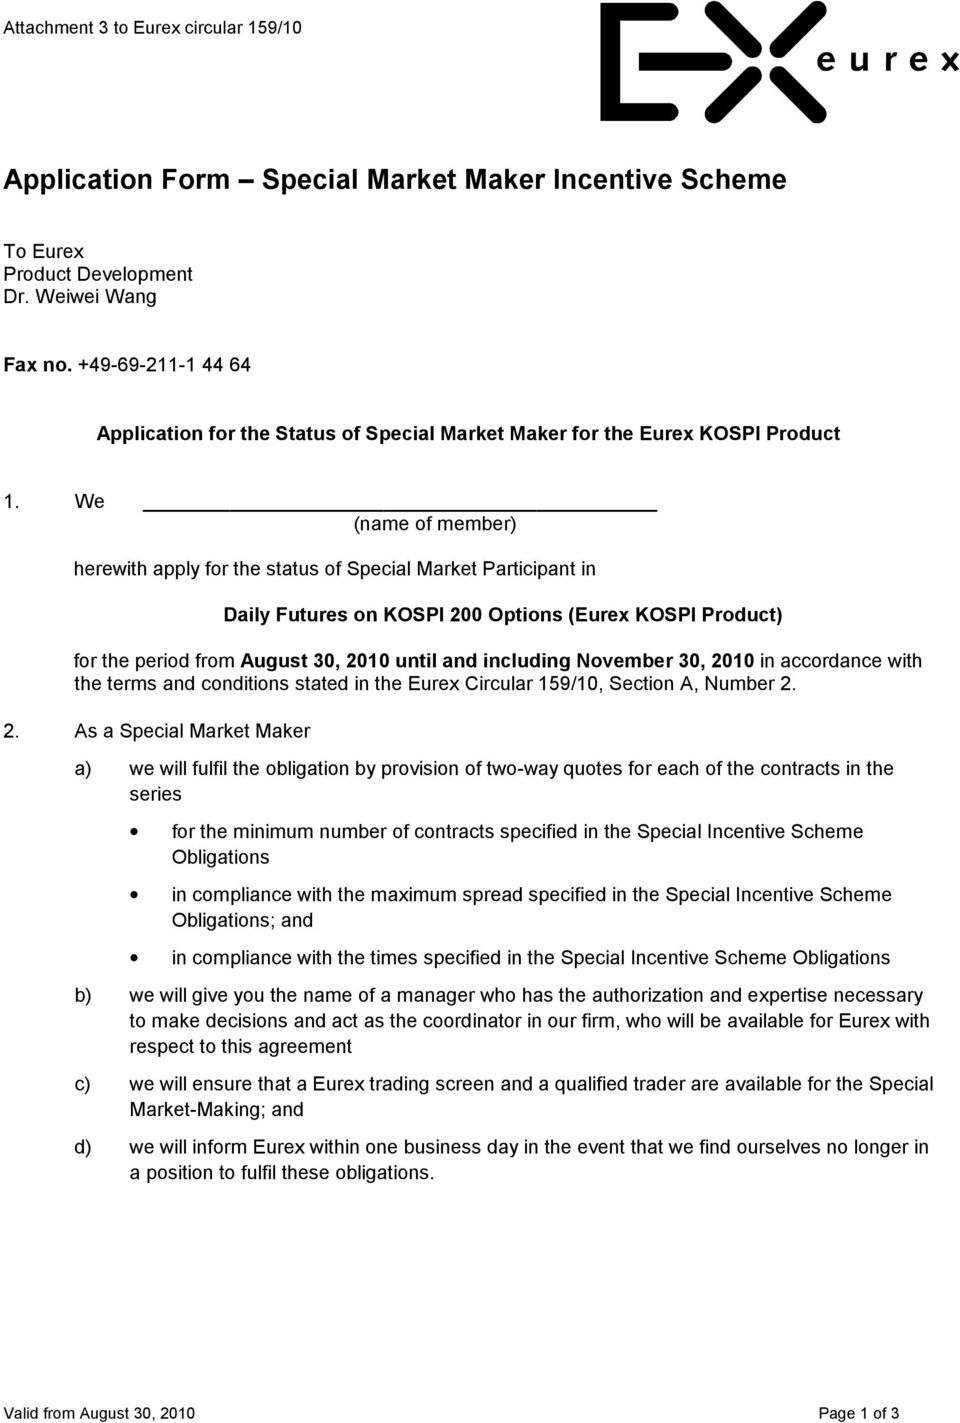 We (name of member) herewith apply for the status of Special Market Participant in Daily Futures on KOSPI 200 Options (Eurex KOSPI Product) for the period from August 30, 2010 until and including